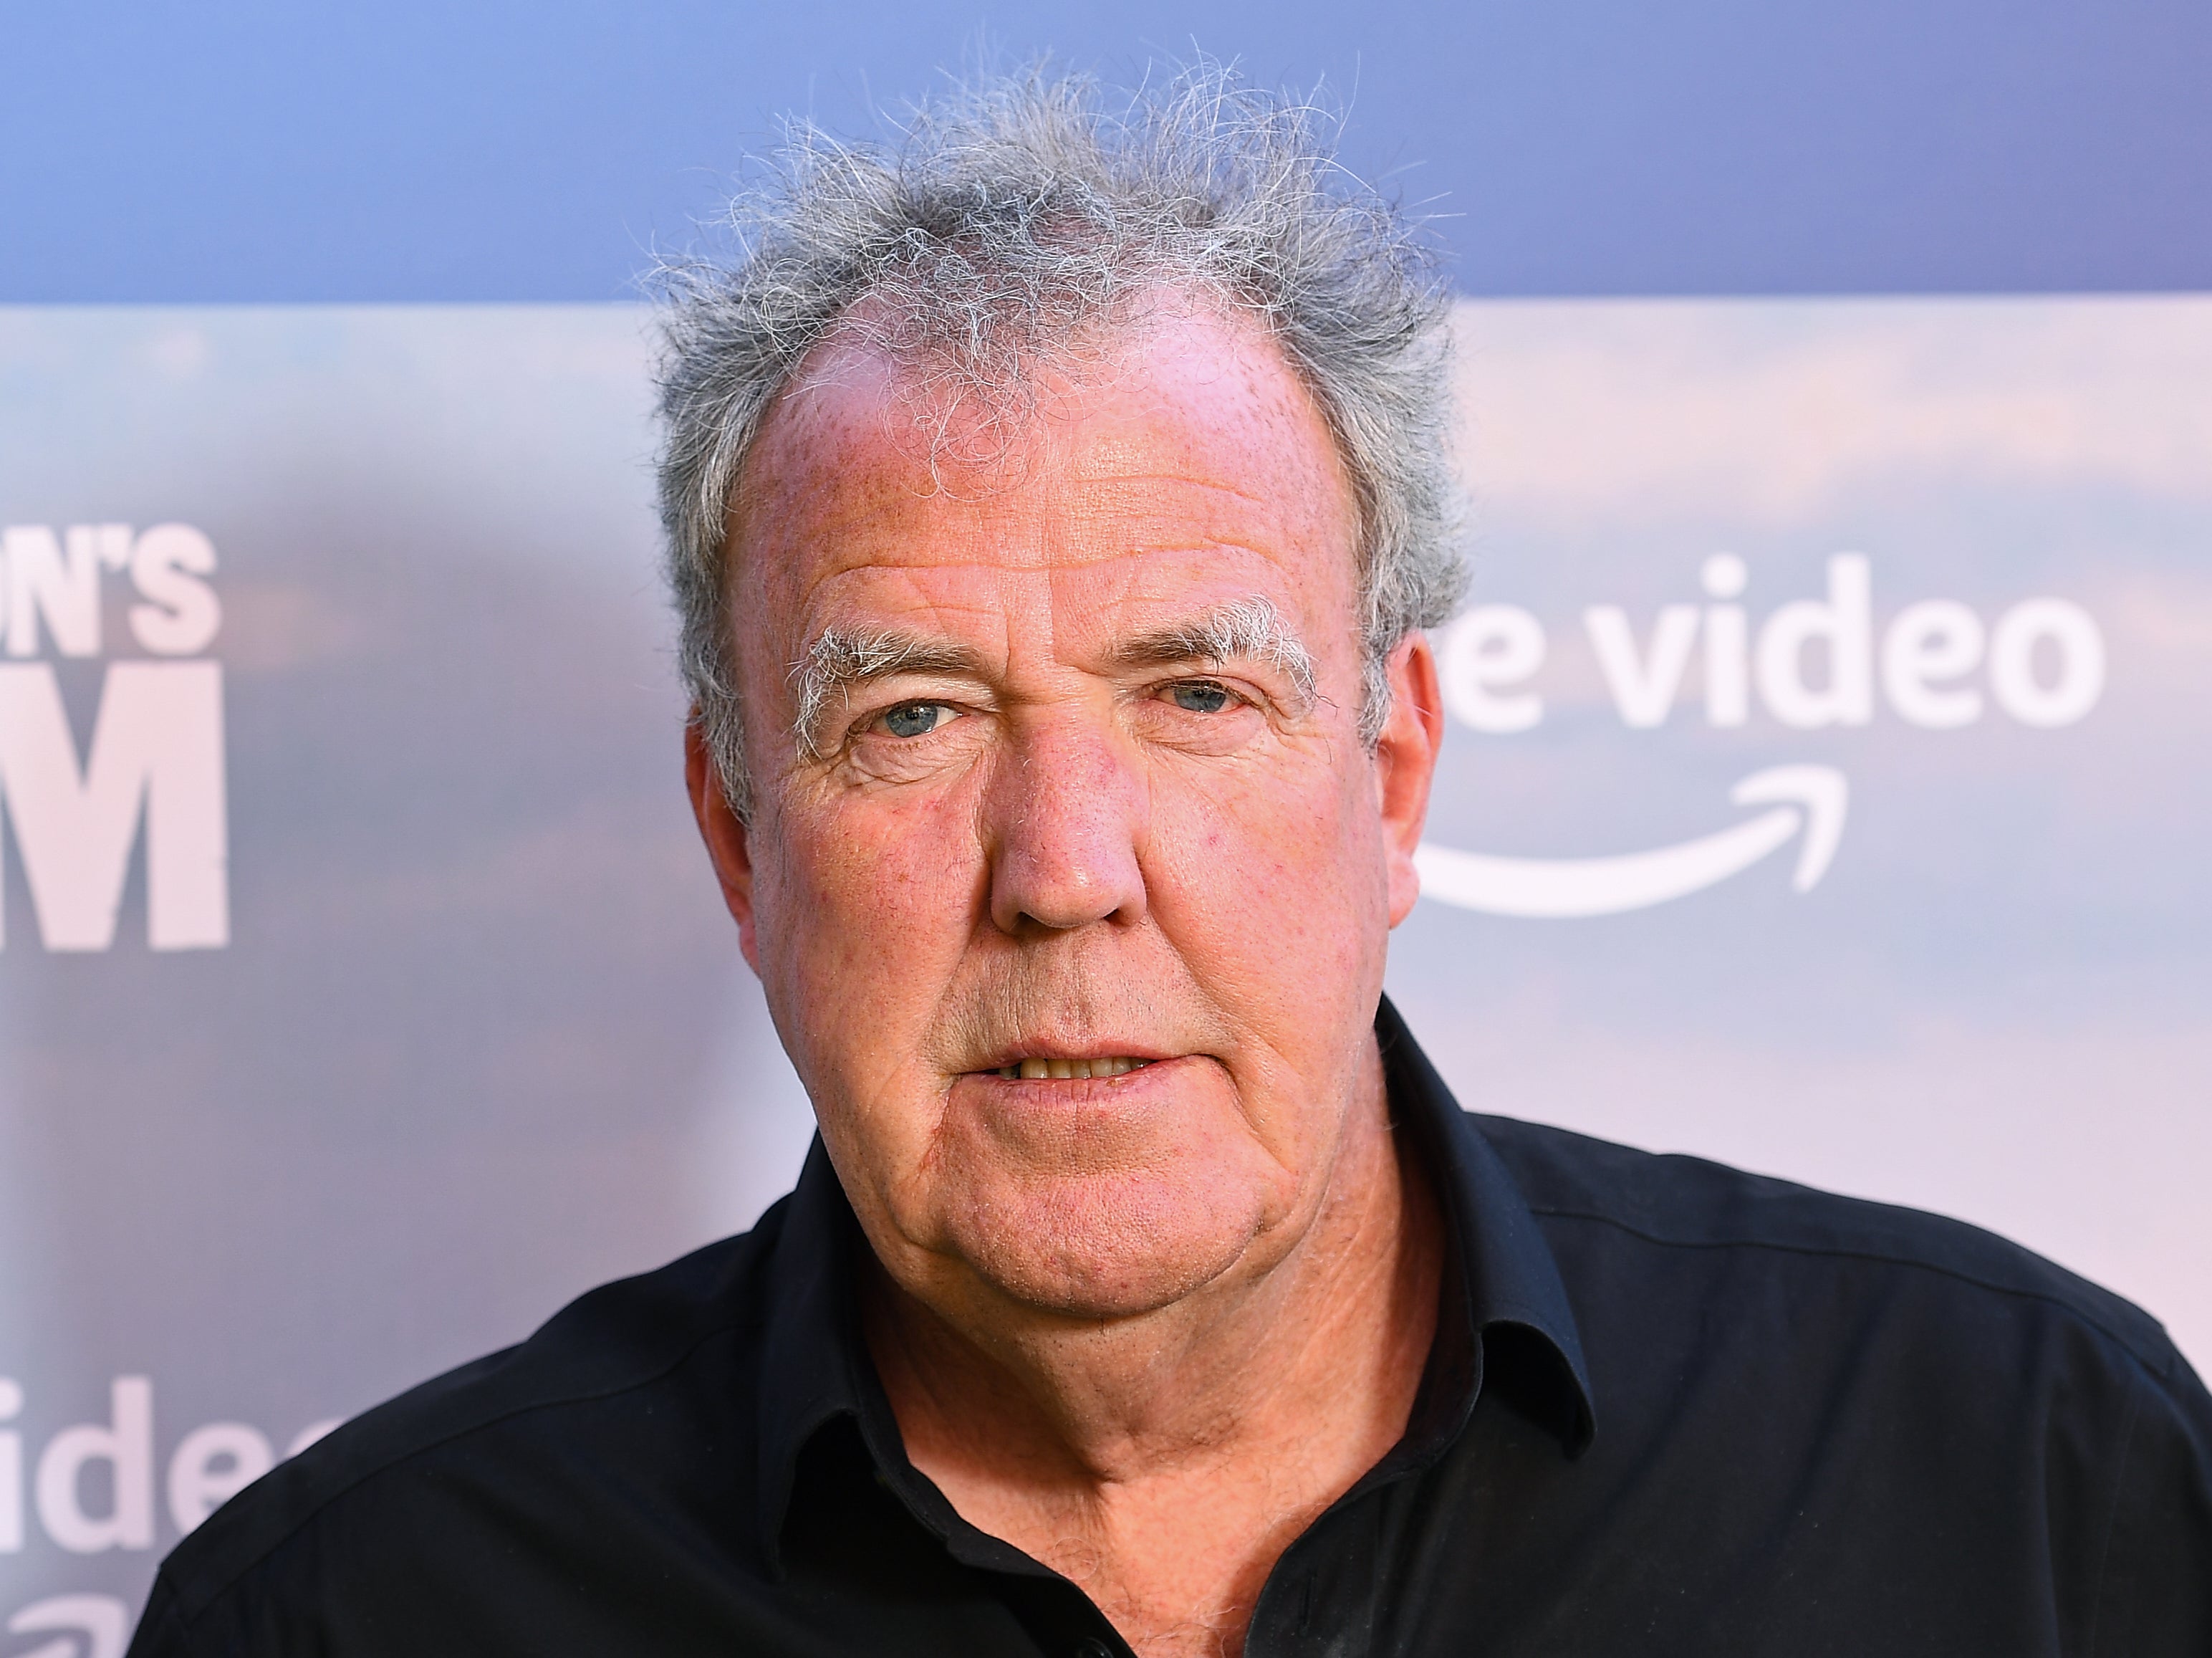 Jeremy Clarkson has been condemned for his column on Meghan